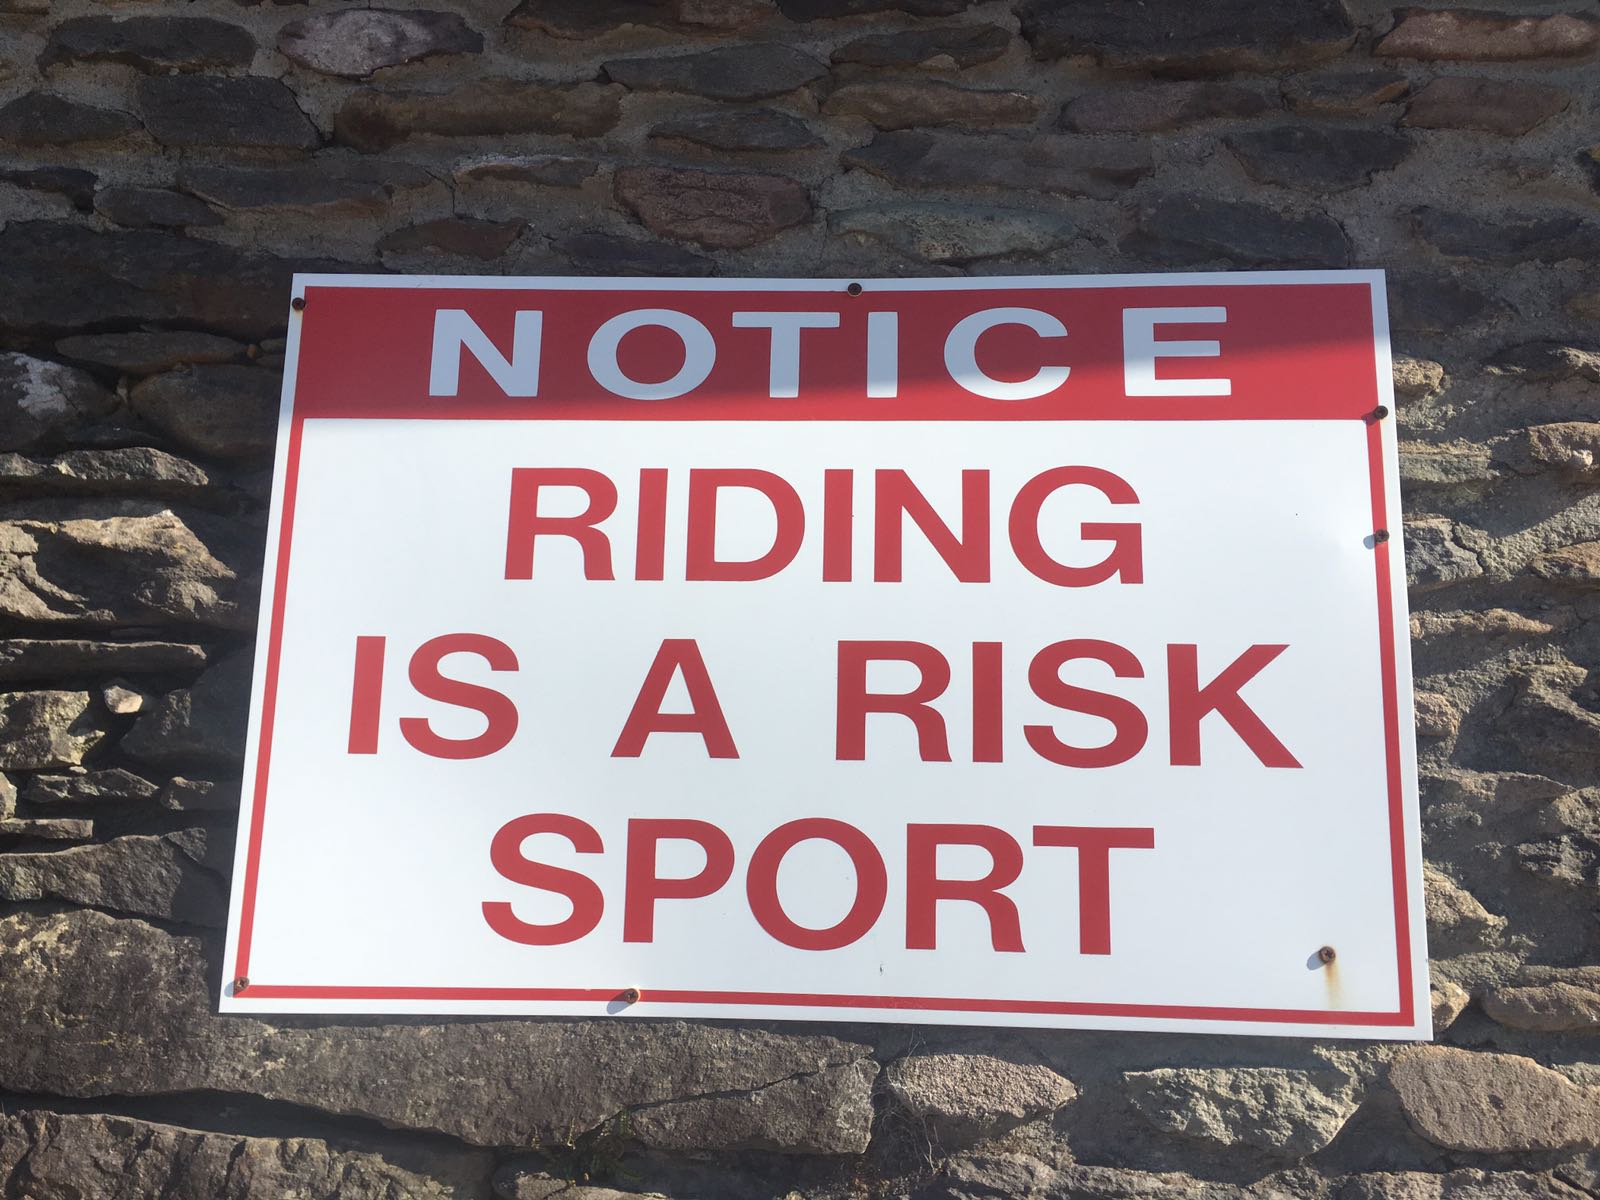 Notice: Riding is a Risk Sport